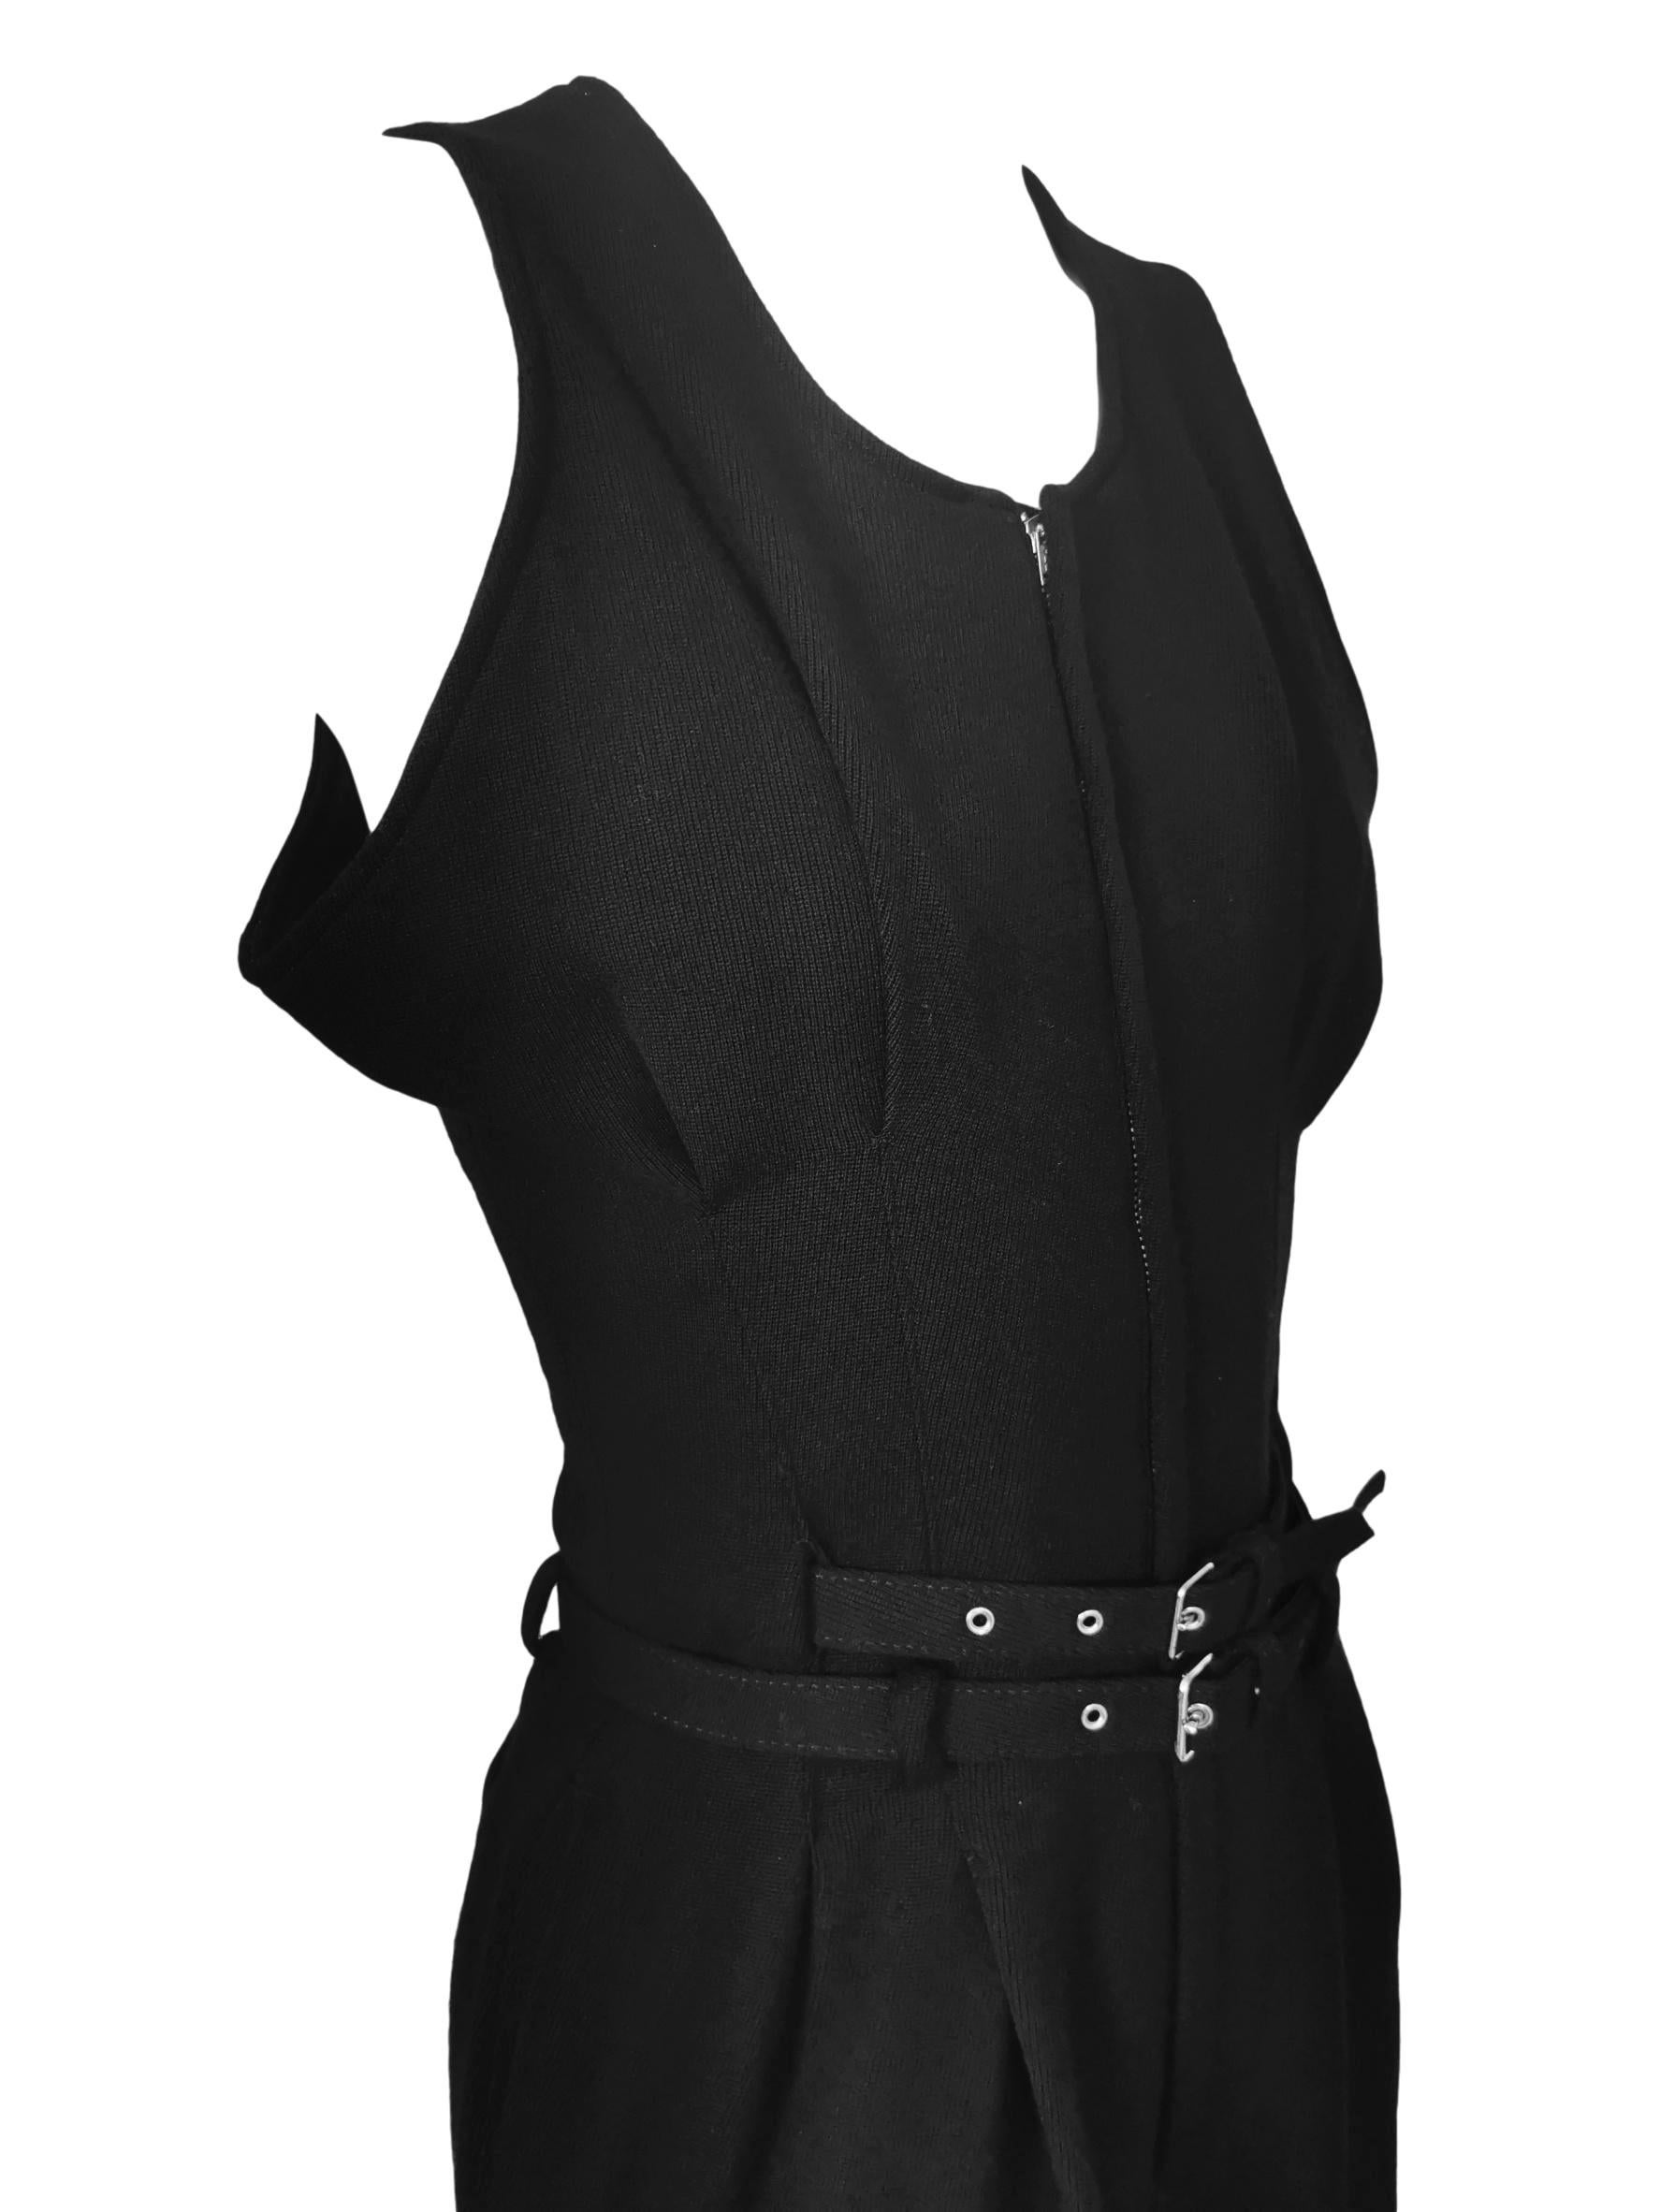 Comme des Garcons Wool Double Belted Jumpsuit AD 1989 For Sale 10